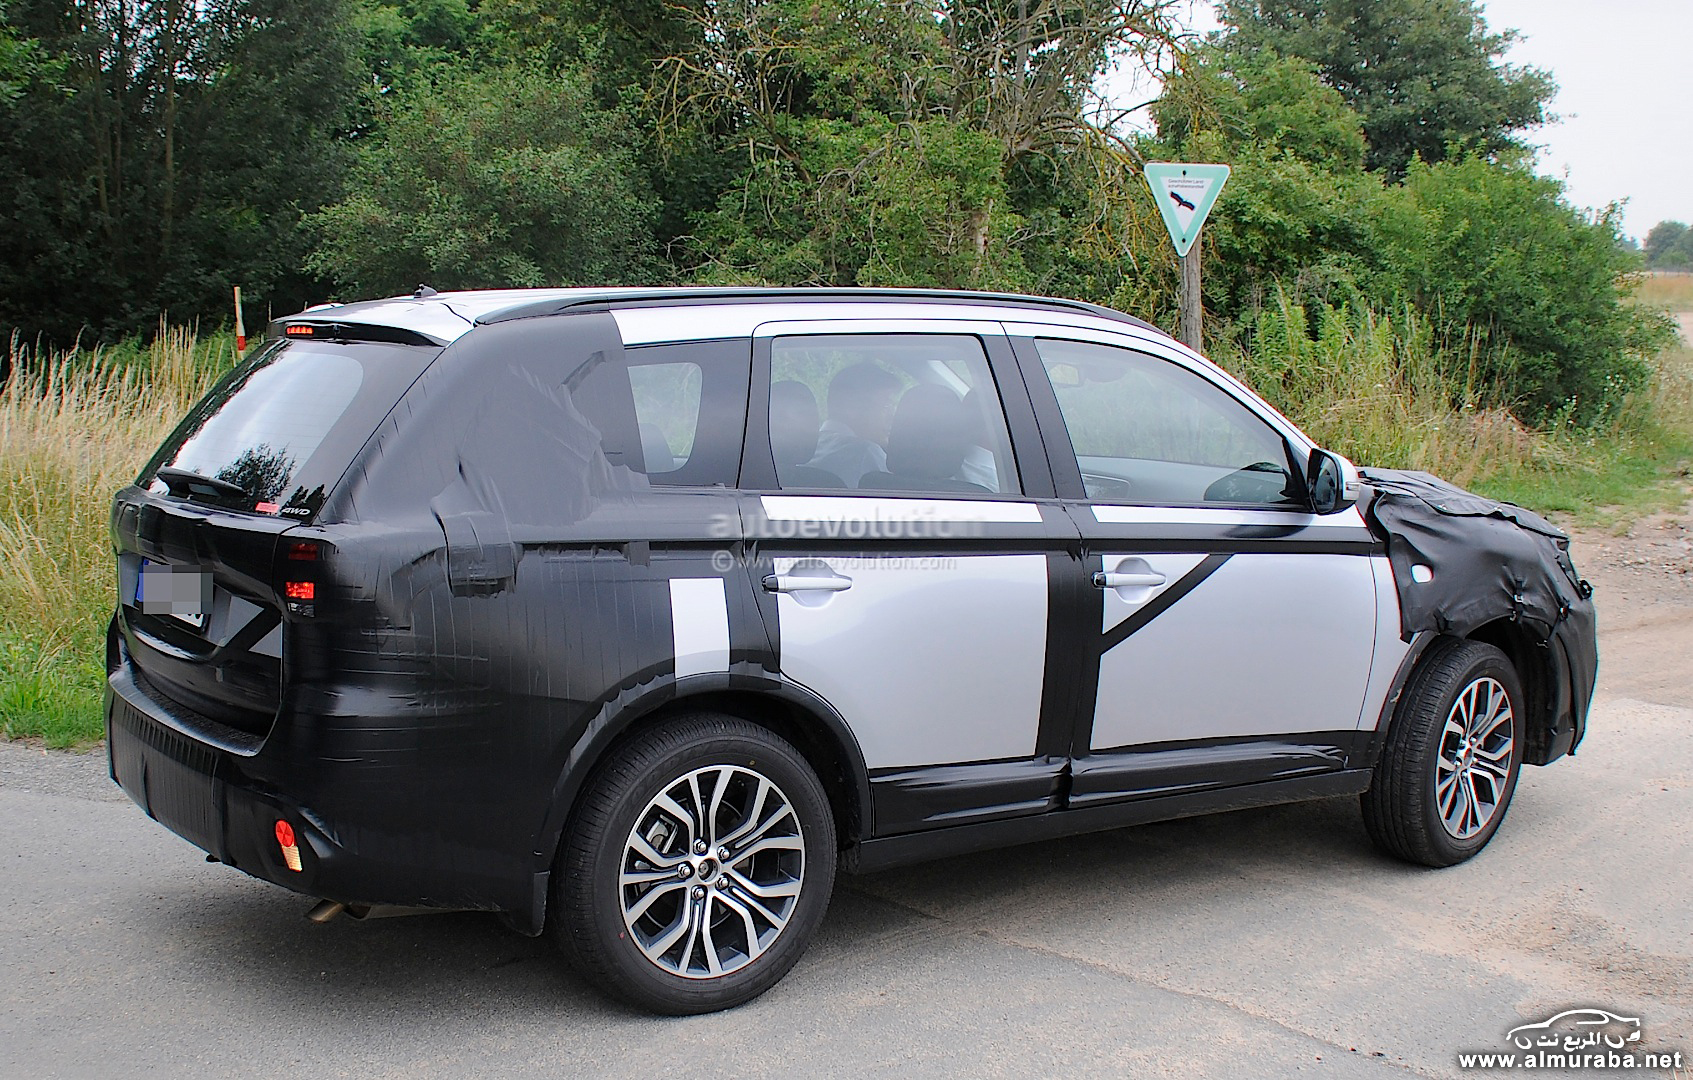 2015-mitsubishi-outlander-spied-again-this-time-in-europe-photo-gallery_5